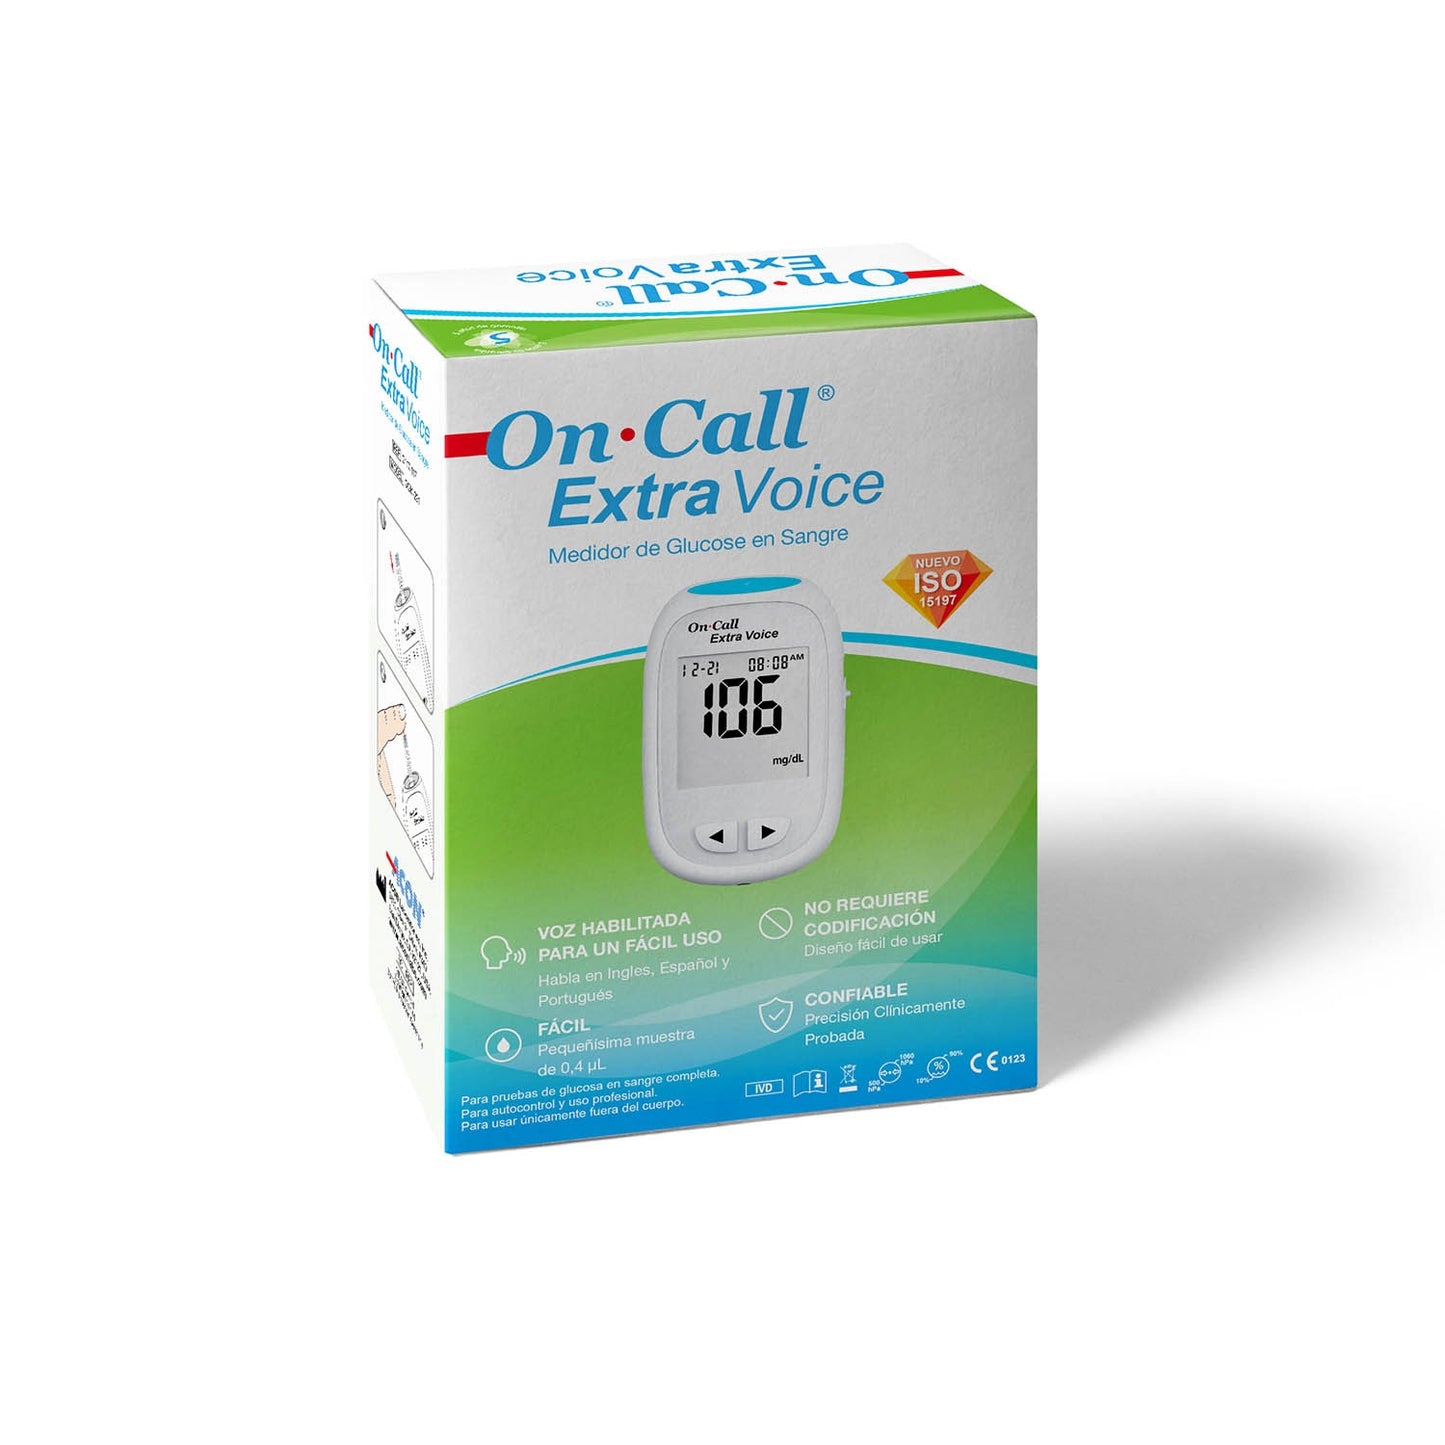 On Call Extra Voice Enabled Blood Glucose Meter